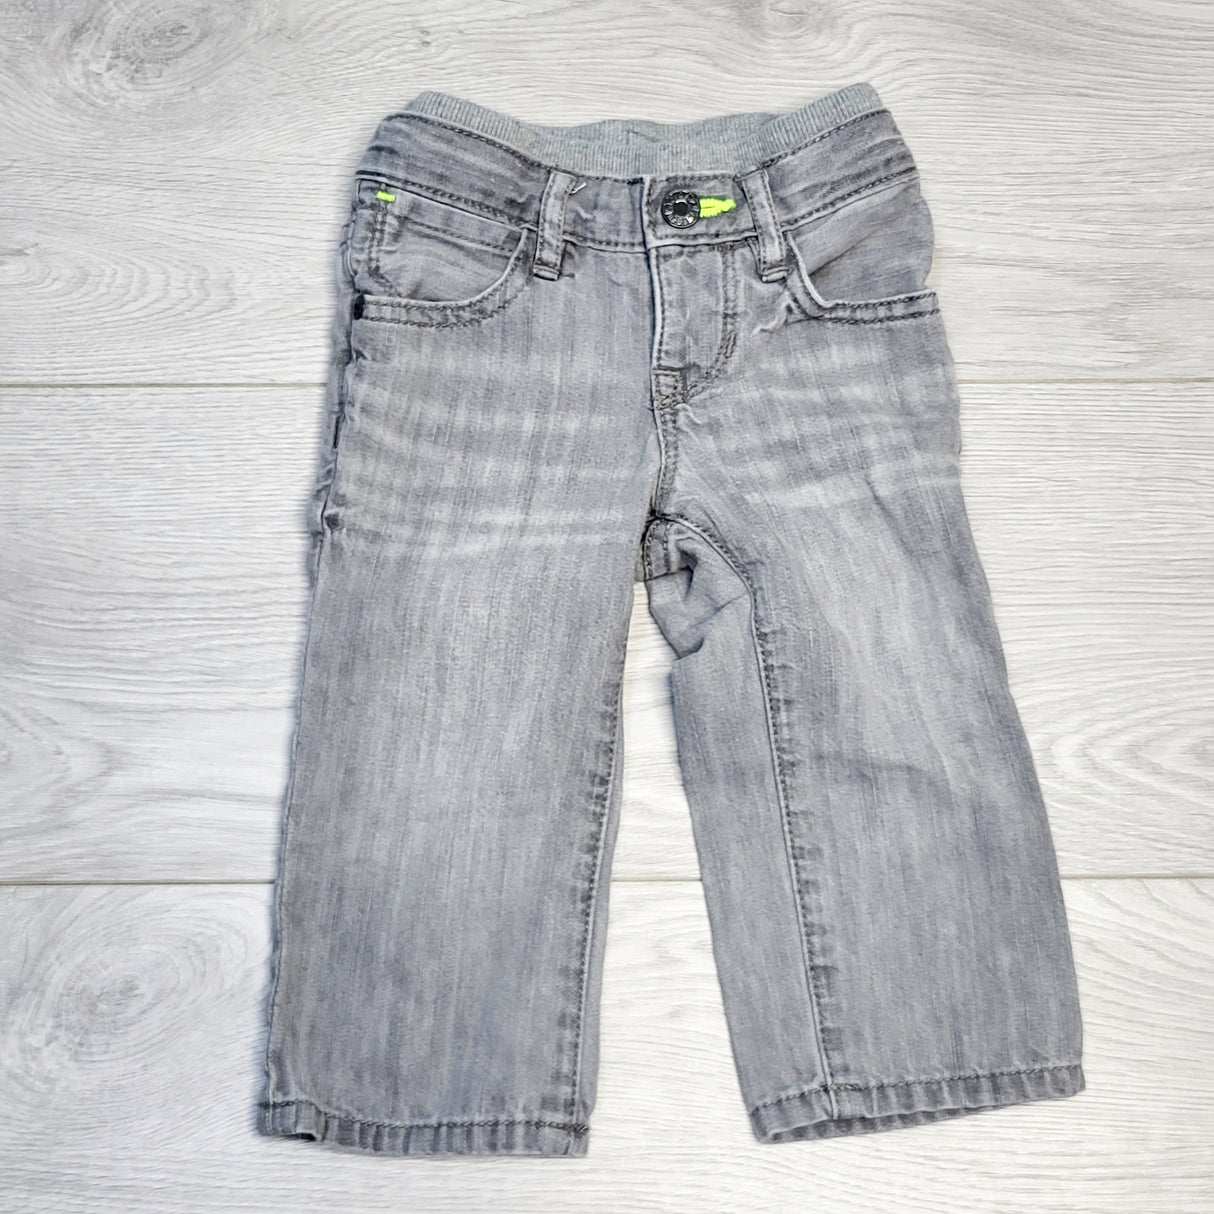 CHOL2 - Gap grey jeans with cotton waistband, size 3-6 months